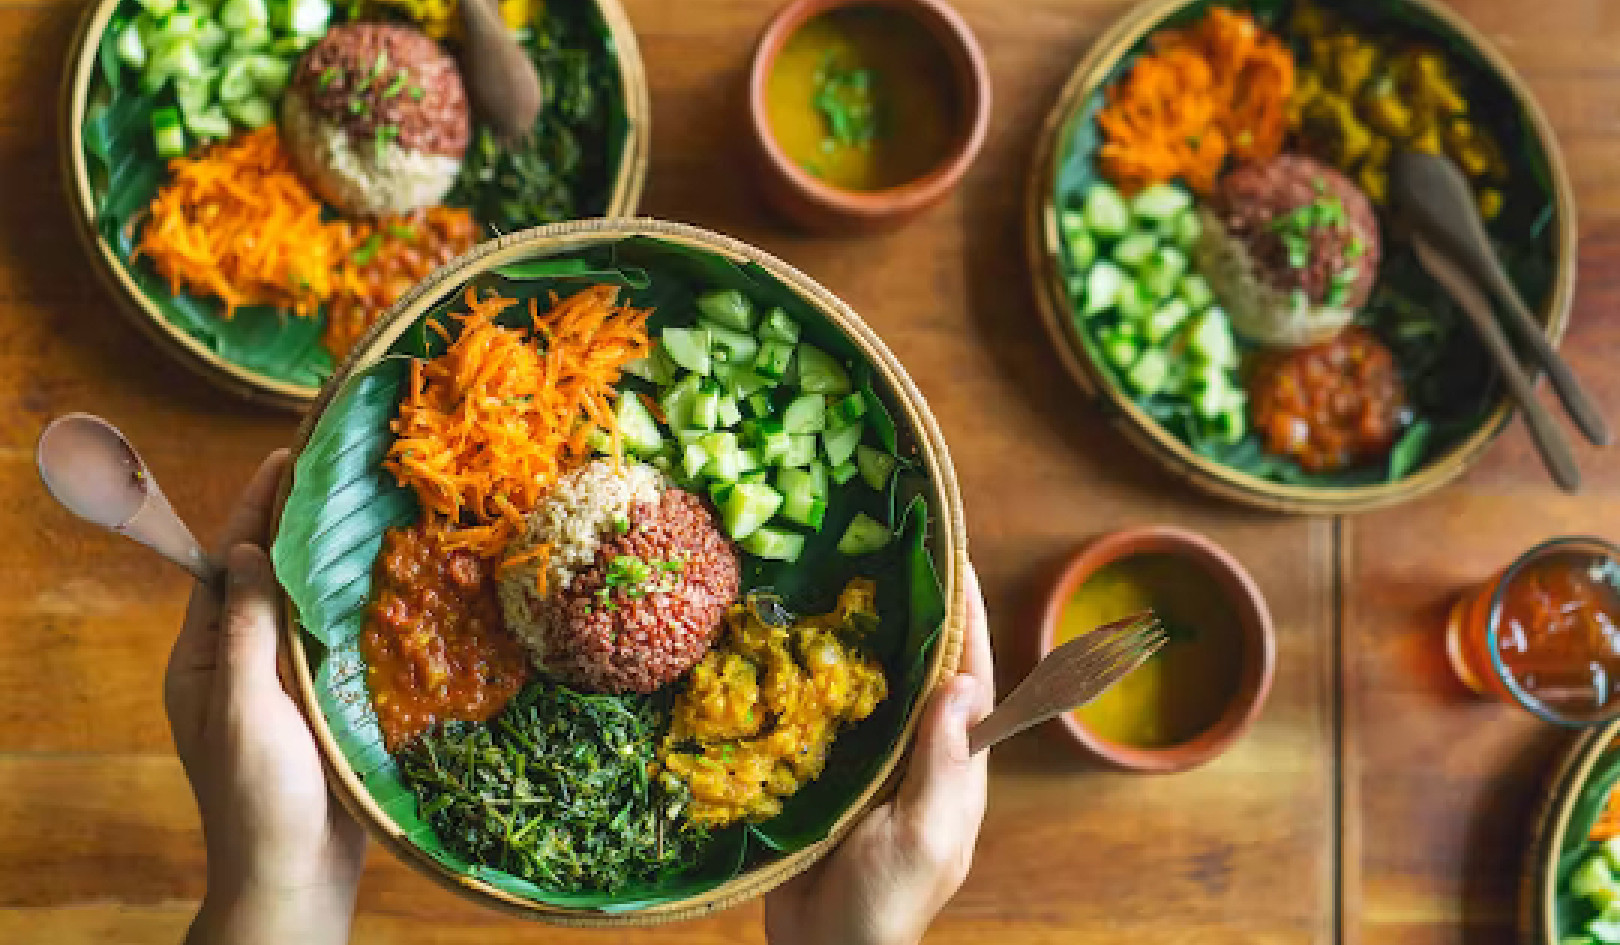 Why Plant-based Diets Need Proper Planning